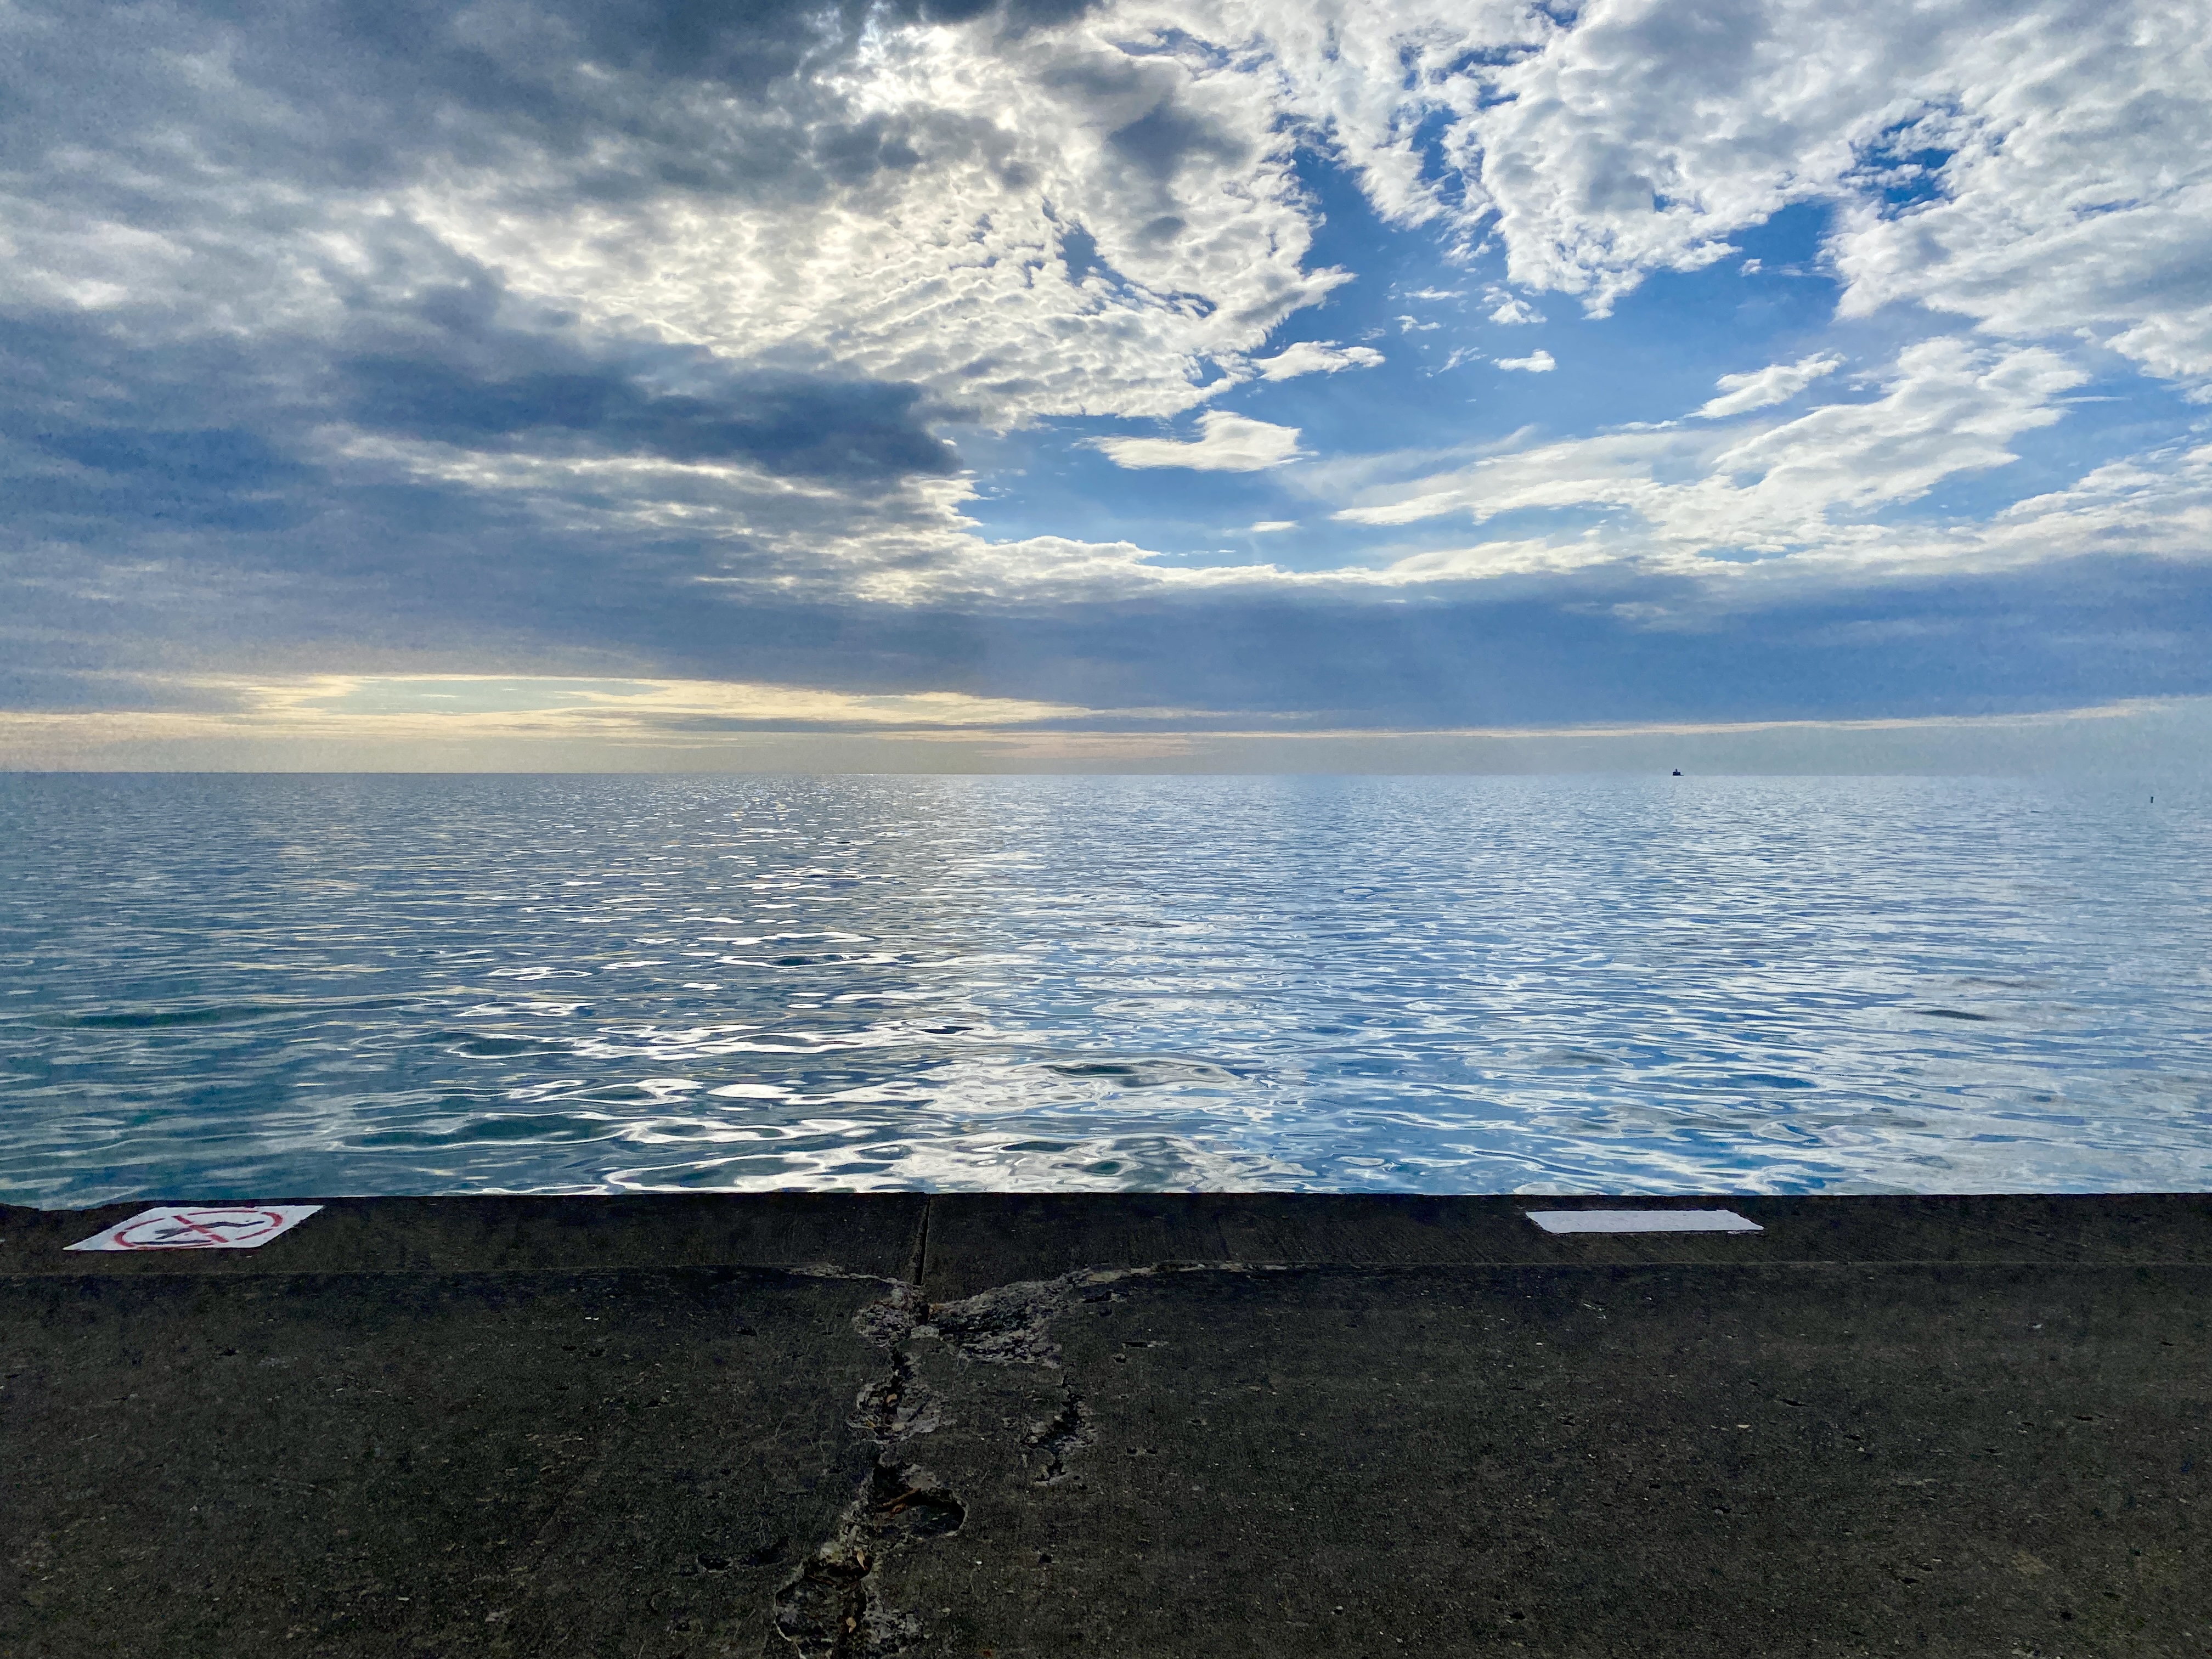 Horizon of a large lake with clouds swept over a blue sky and a strip of yellow light with the early morning sun, water smooth, and a strip of concrete in the foreground